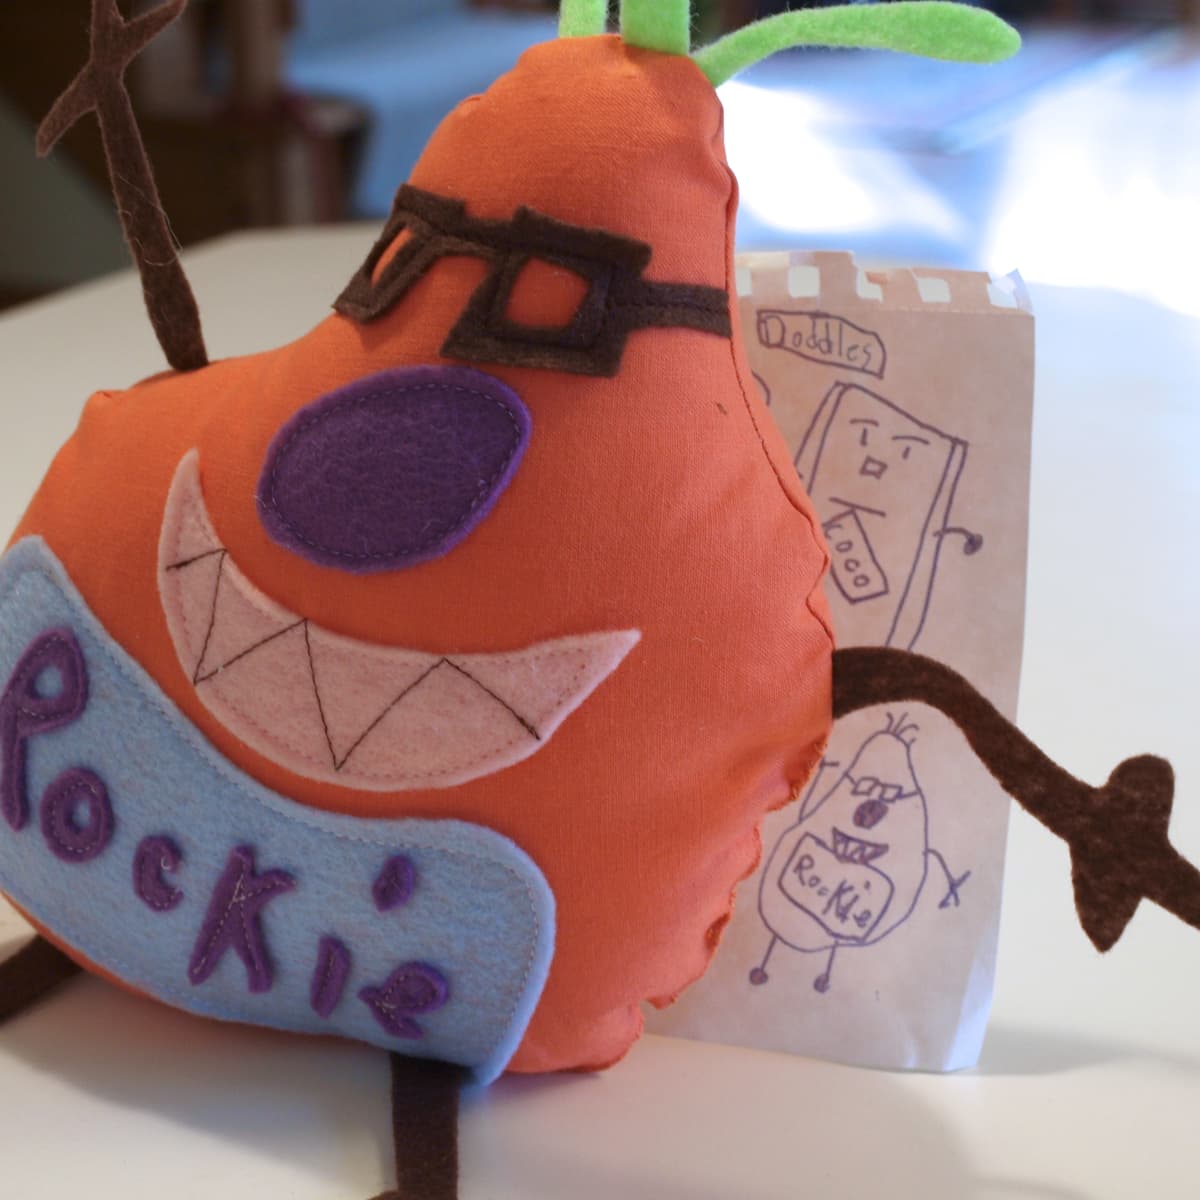 How to Make a Stuffed Toy From a Child's Drawing - FeltMagnet